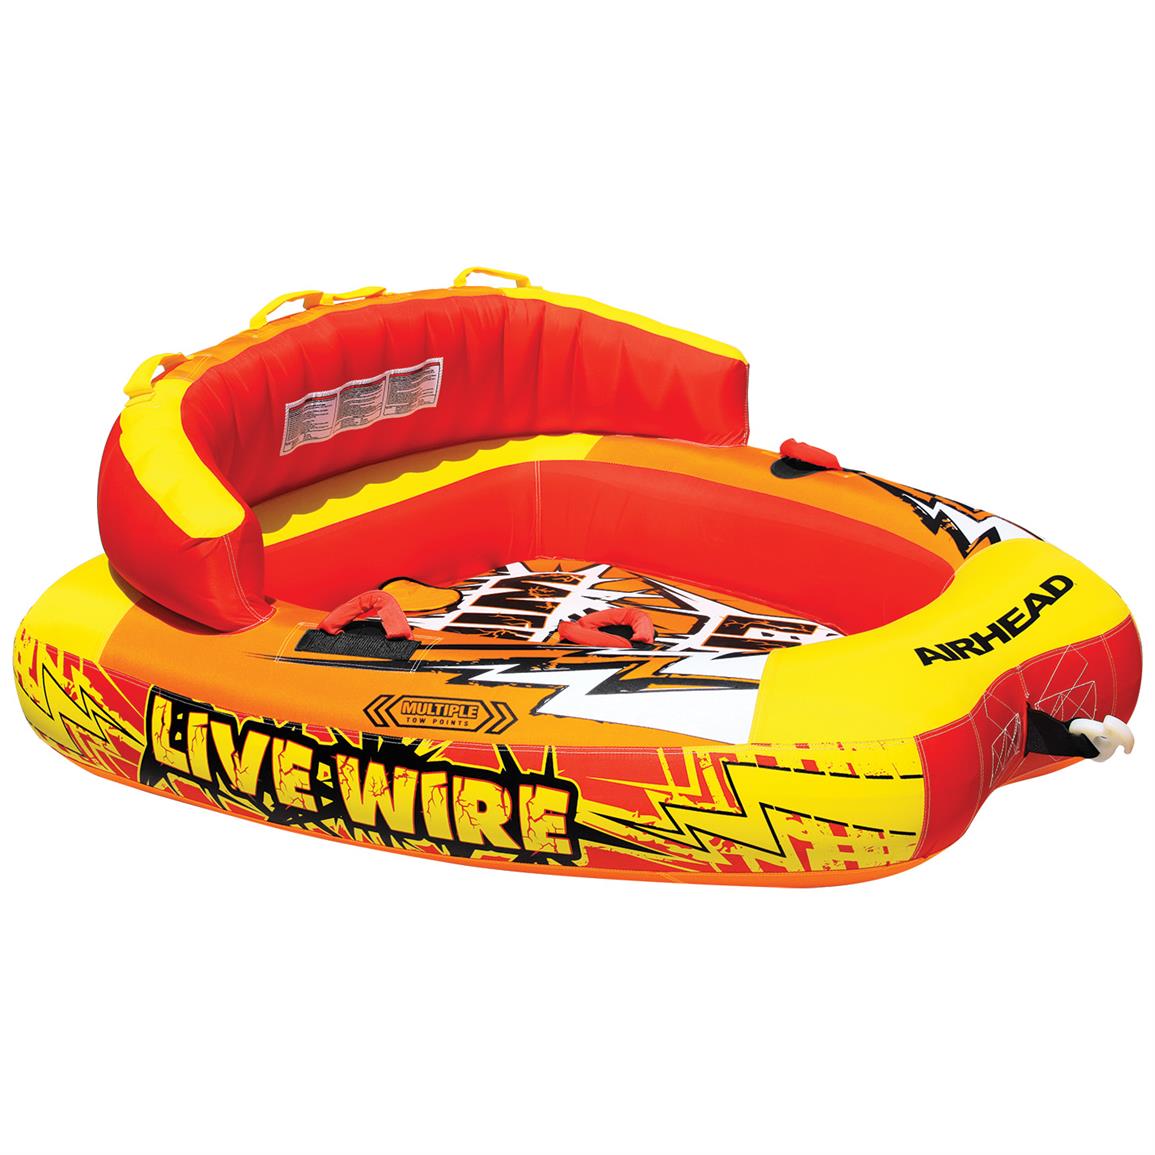 Airhead Live Wire 2 Tube, 2 Person - 672816, Tubes & Towables at